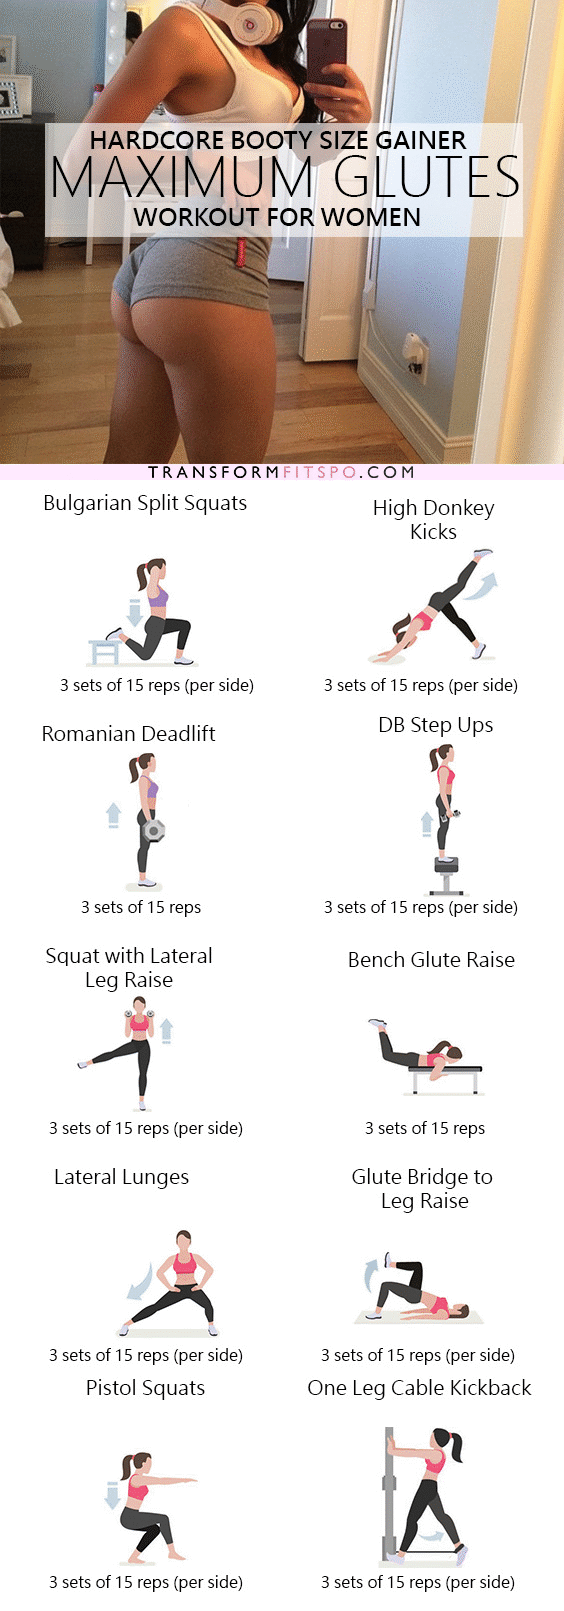 severelyfuturisticharmony: The Only 7-Minutes Workout You Need If you like kung fu,